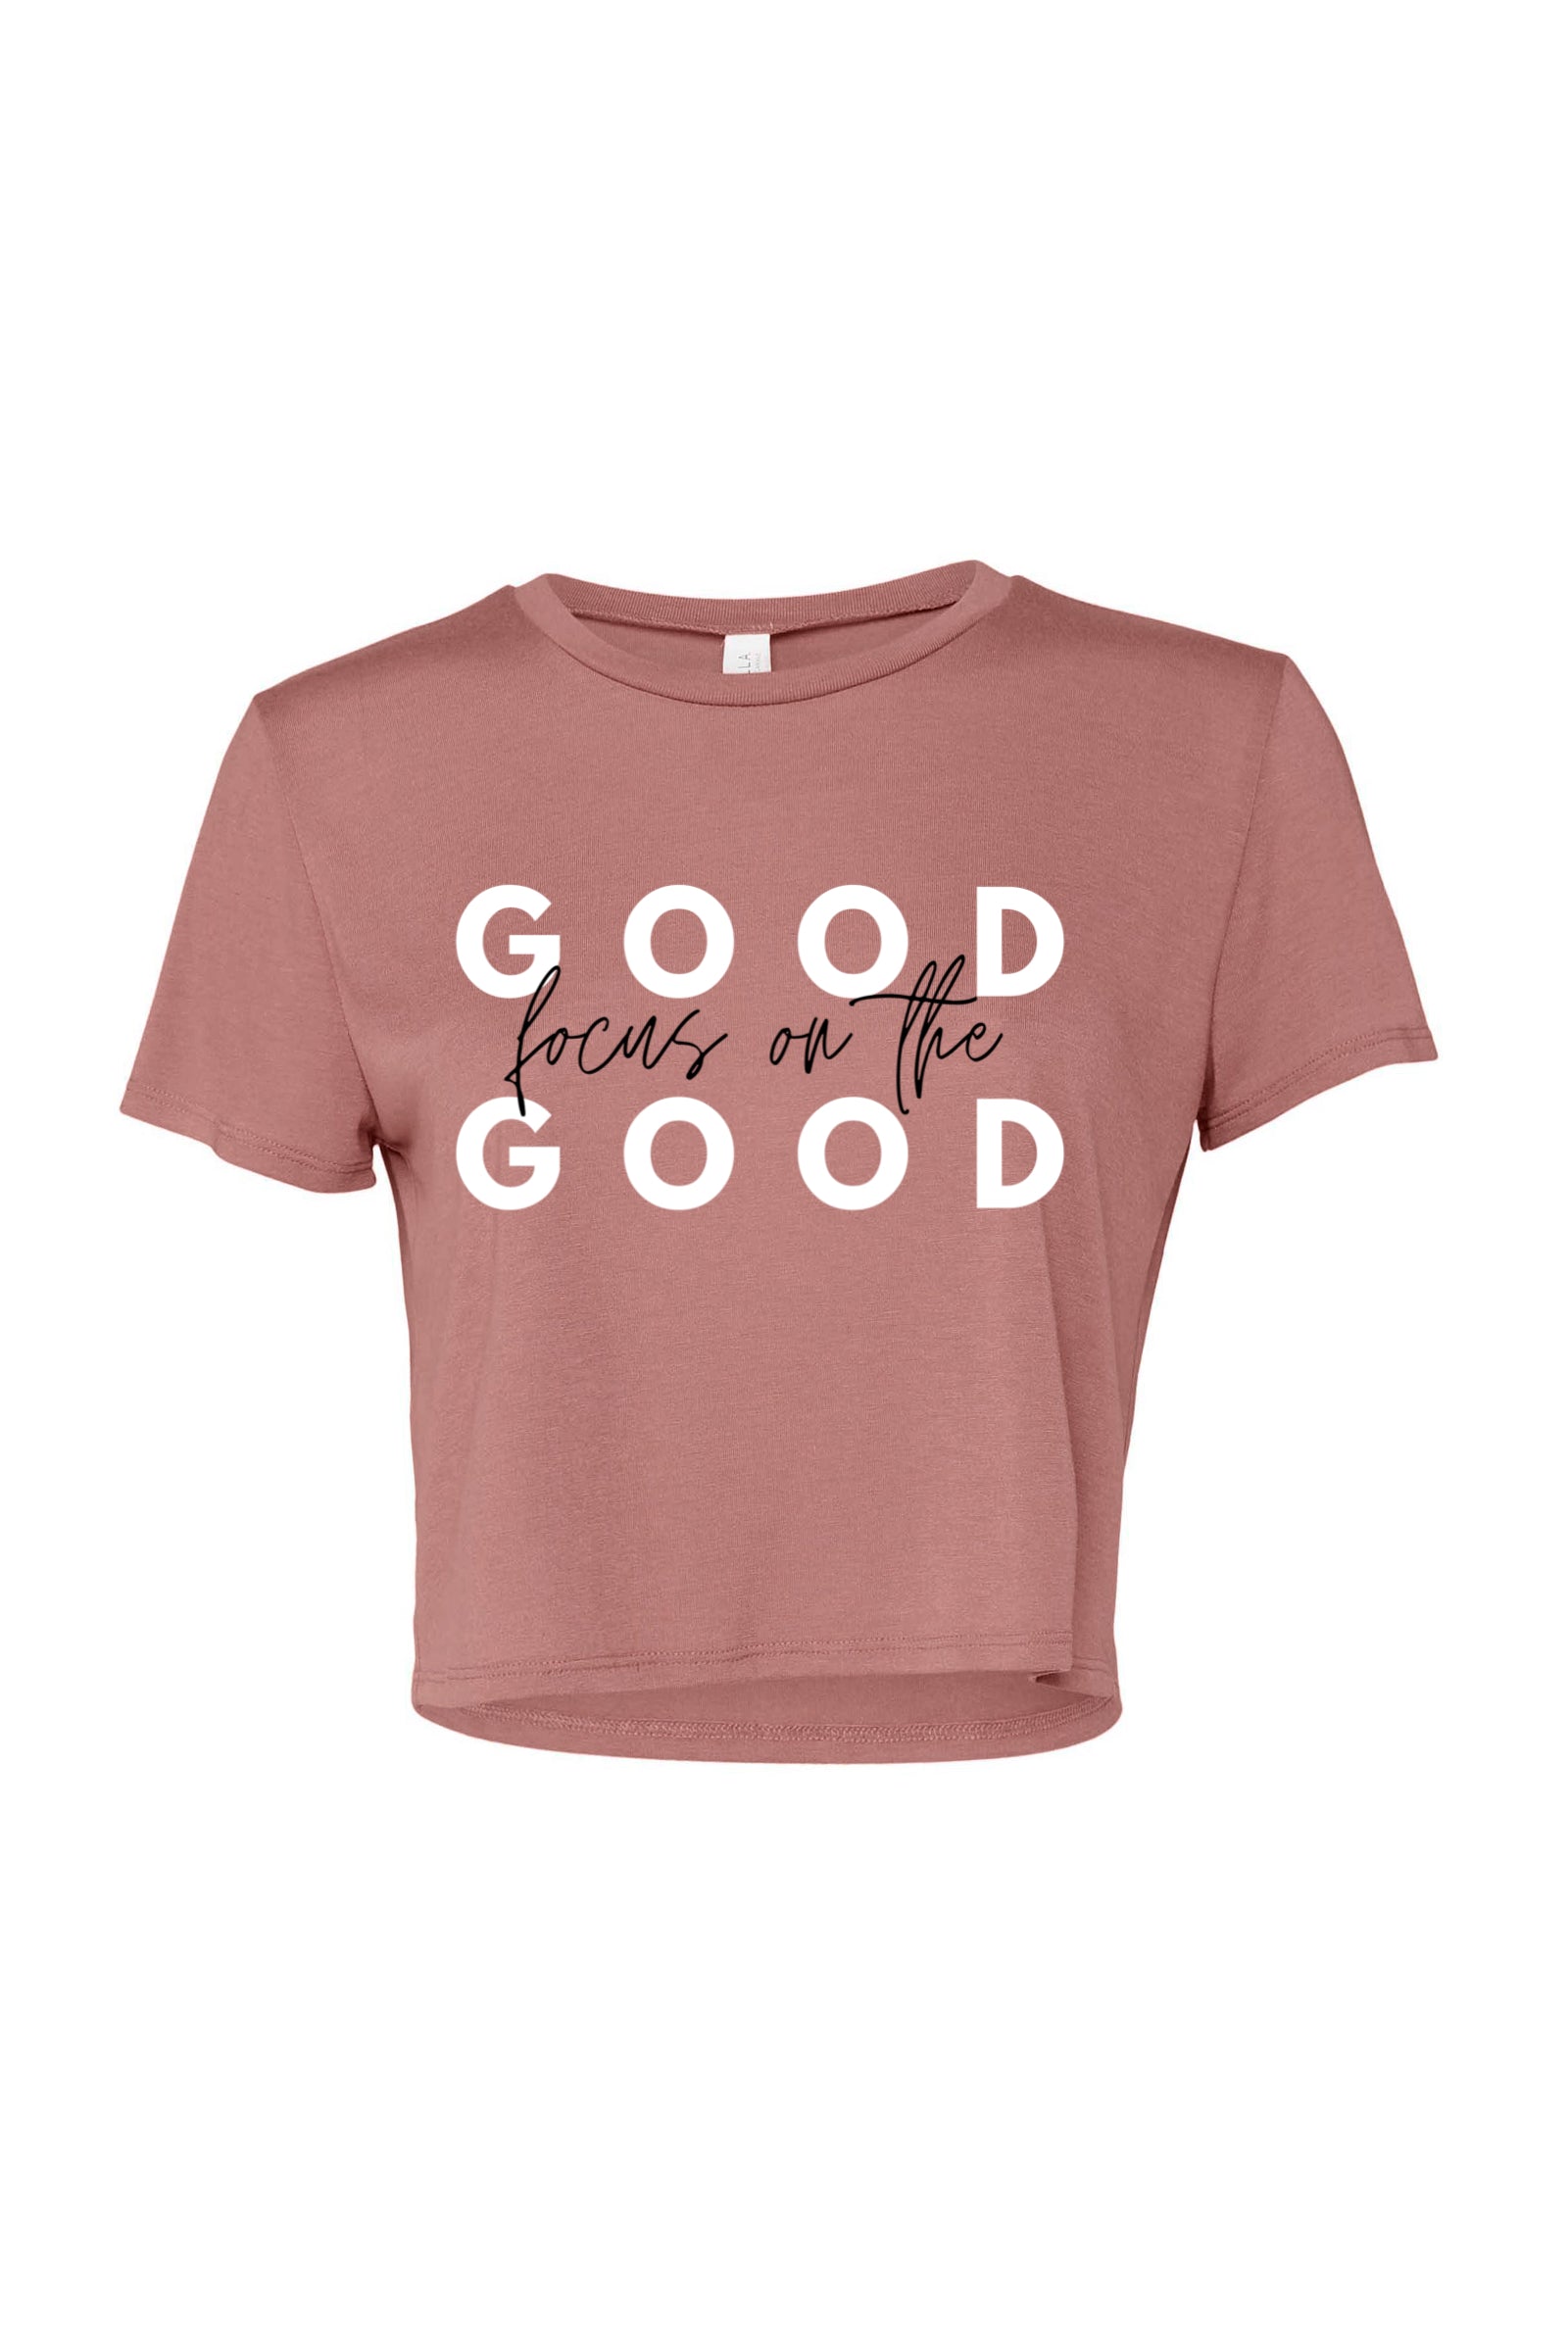 BWELL Crop Tee “Focus on the Good”